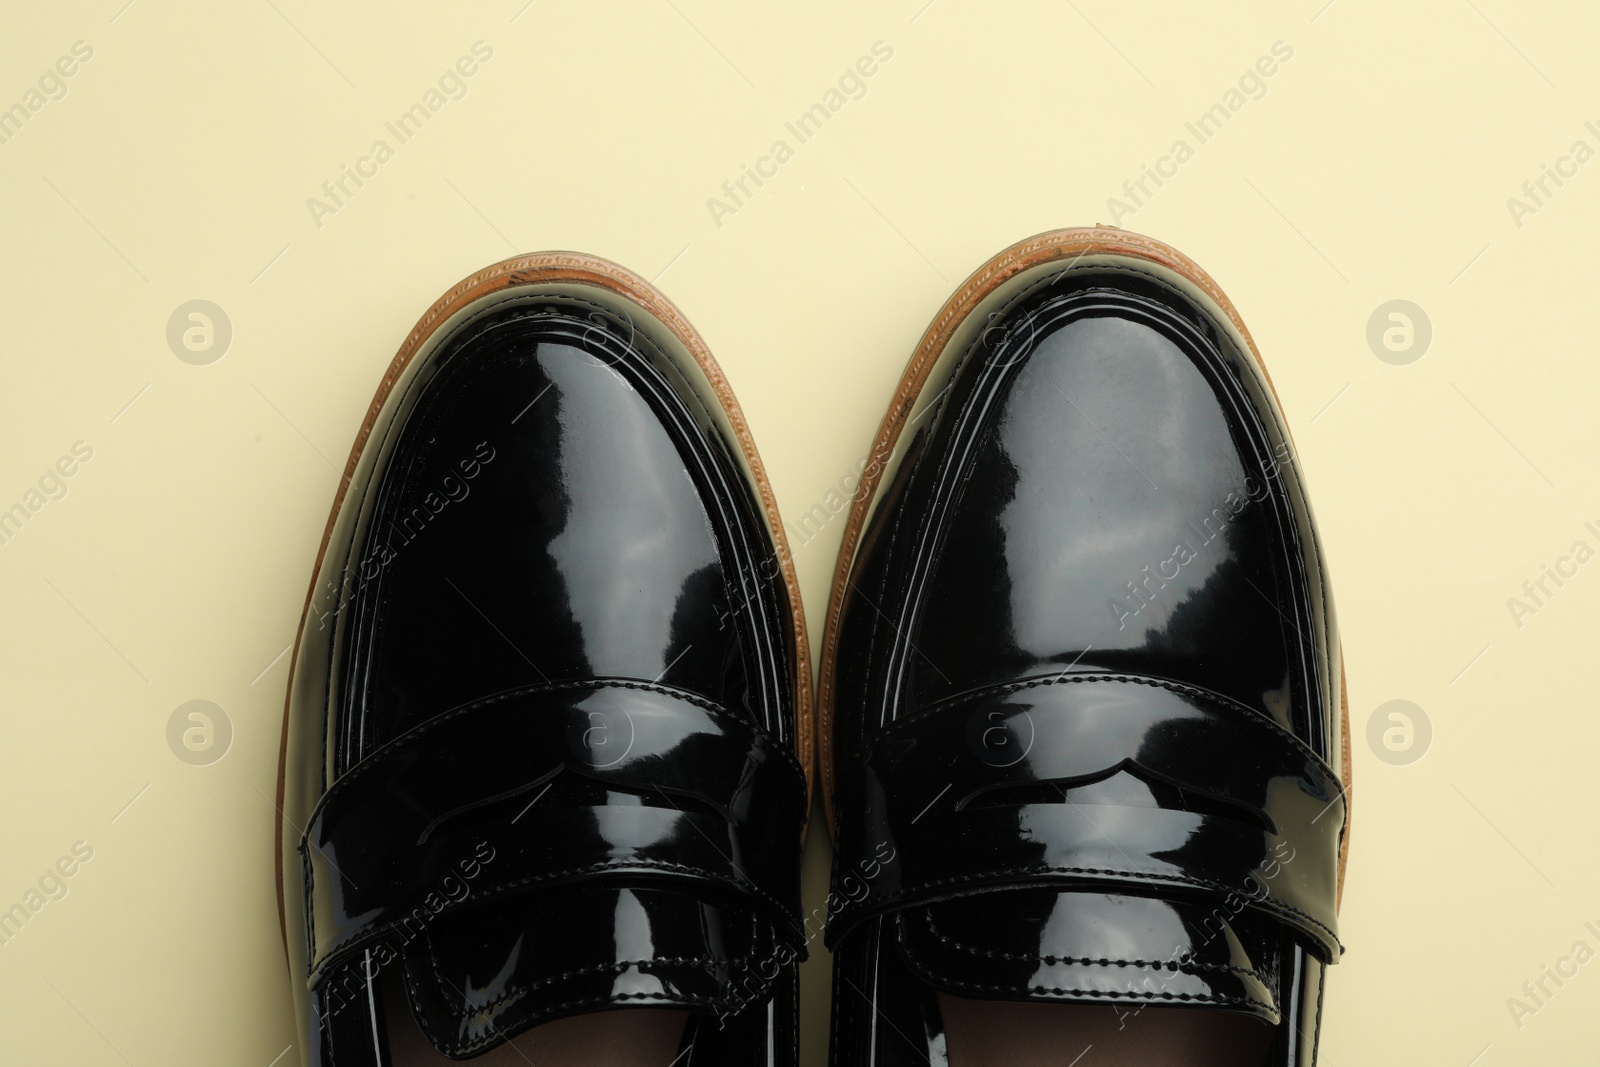 Photo of Pair of stylish female shoes on yellow background, top view